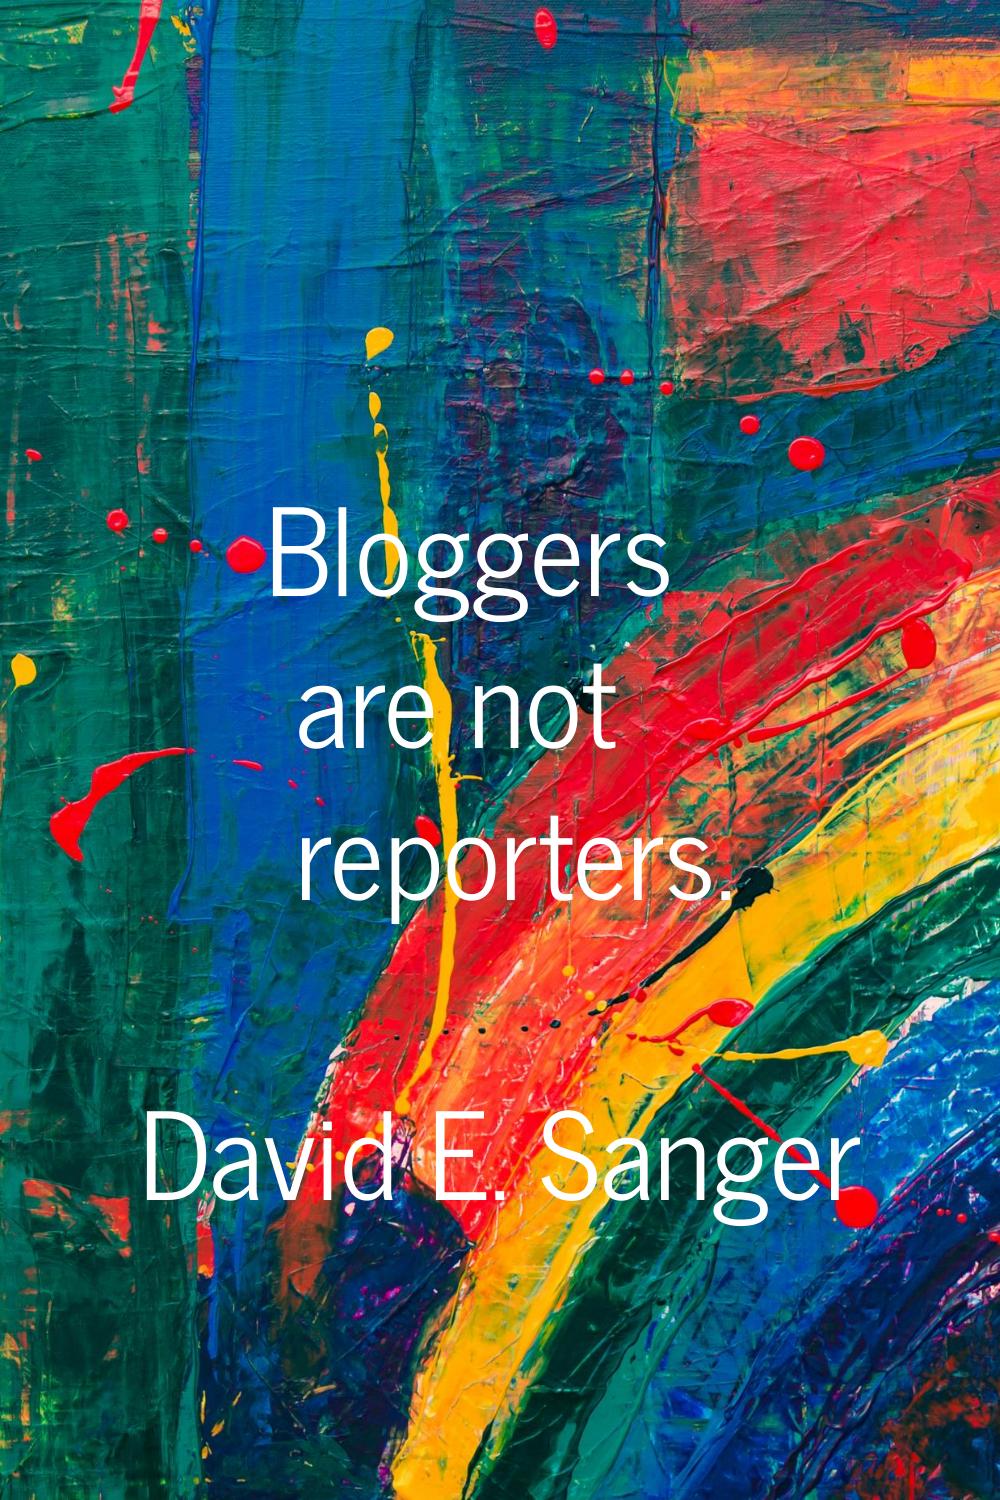 Bloggers are not reporters.